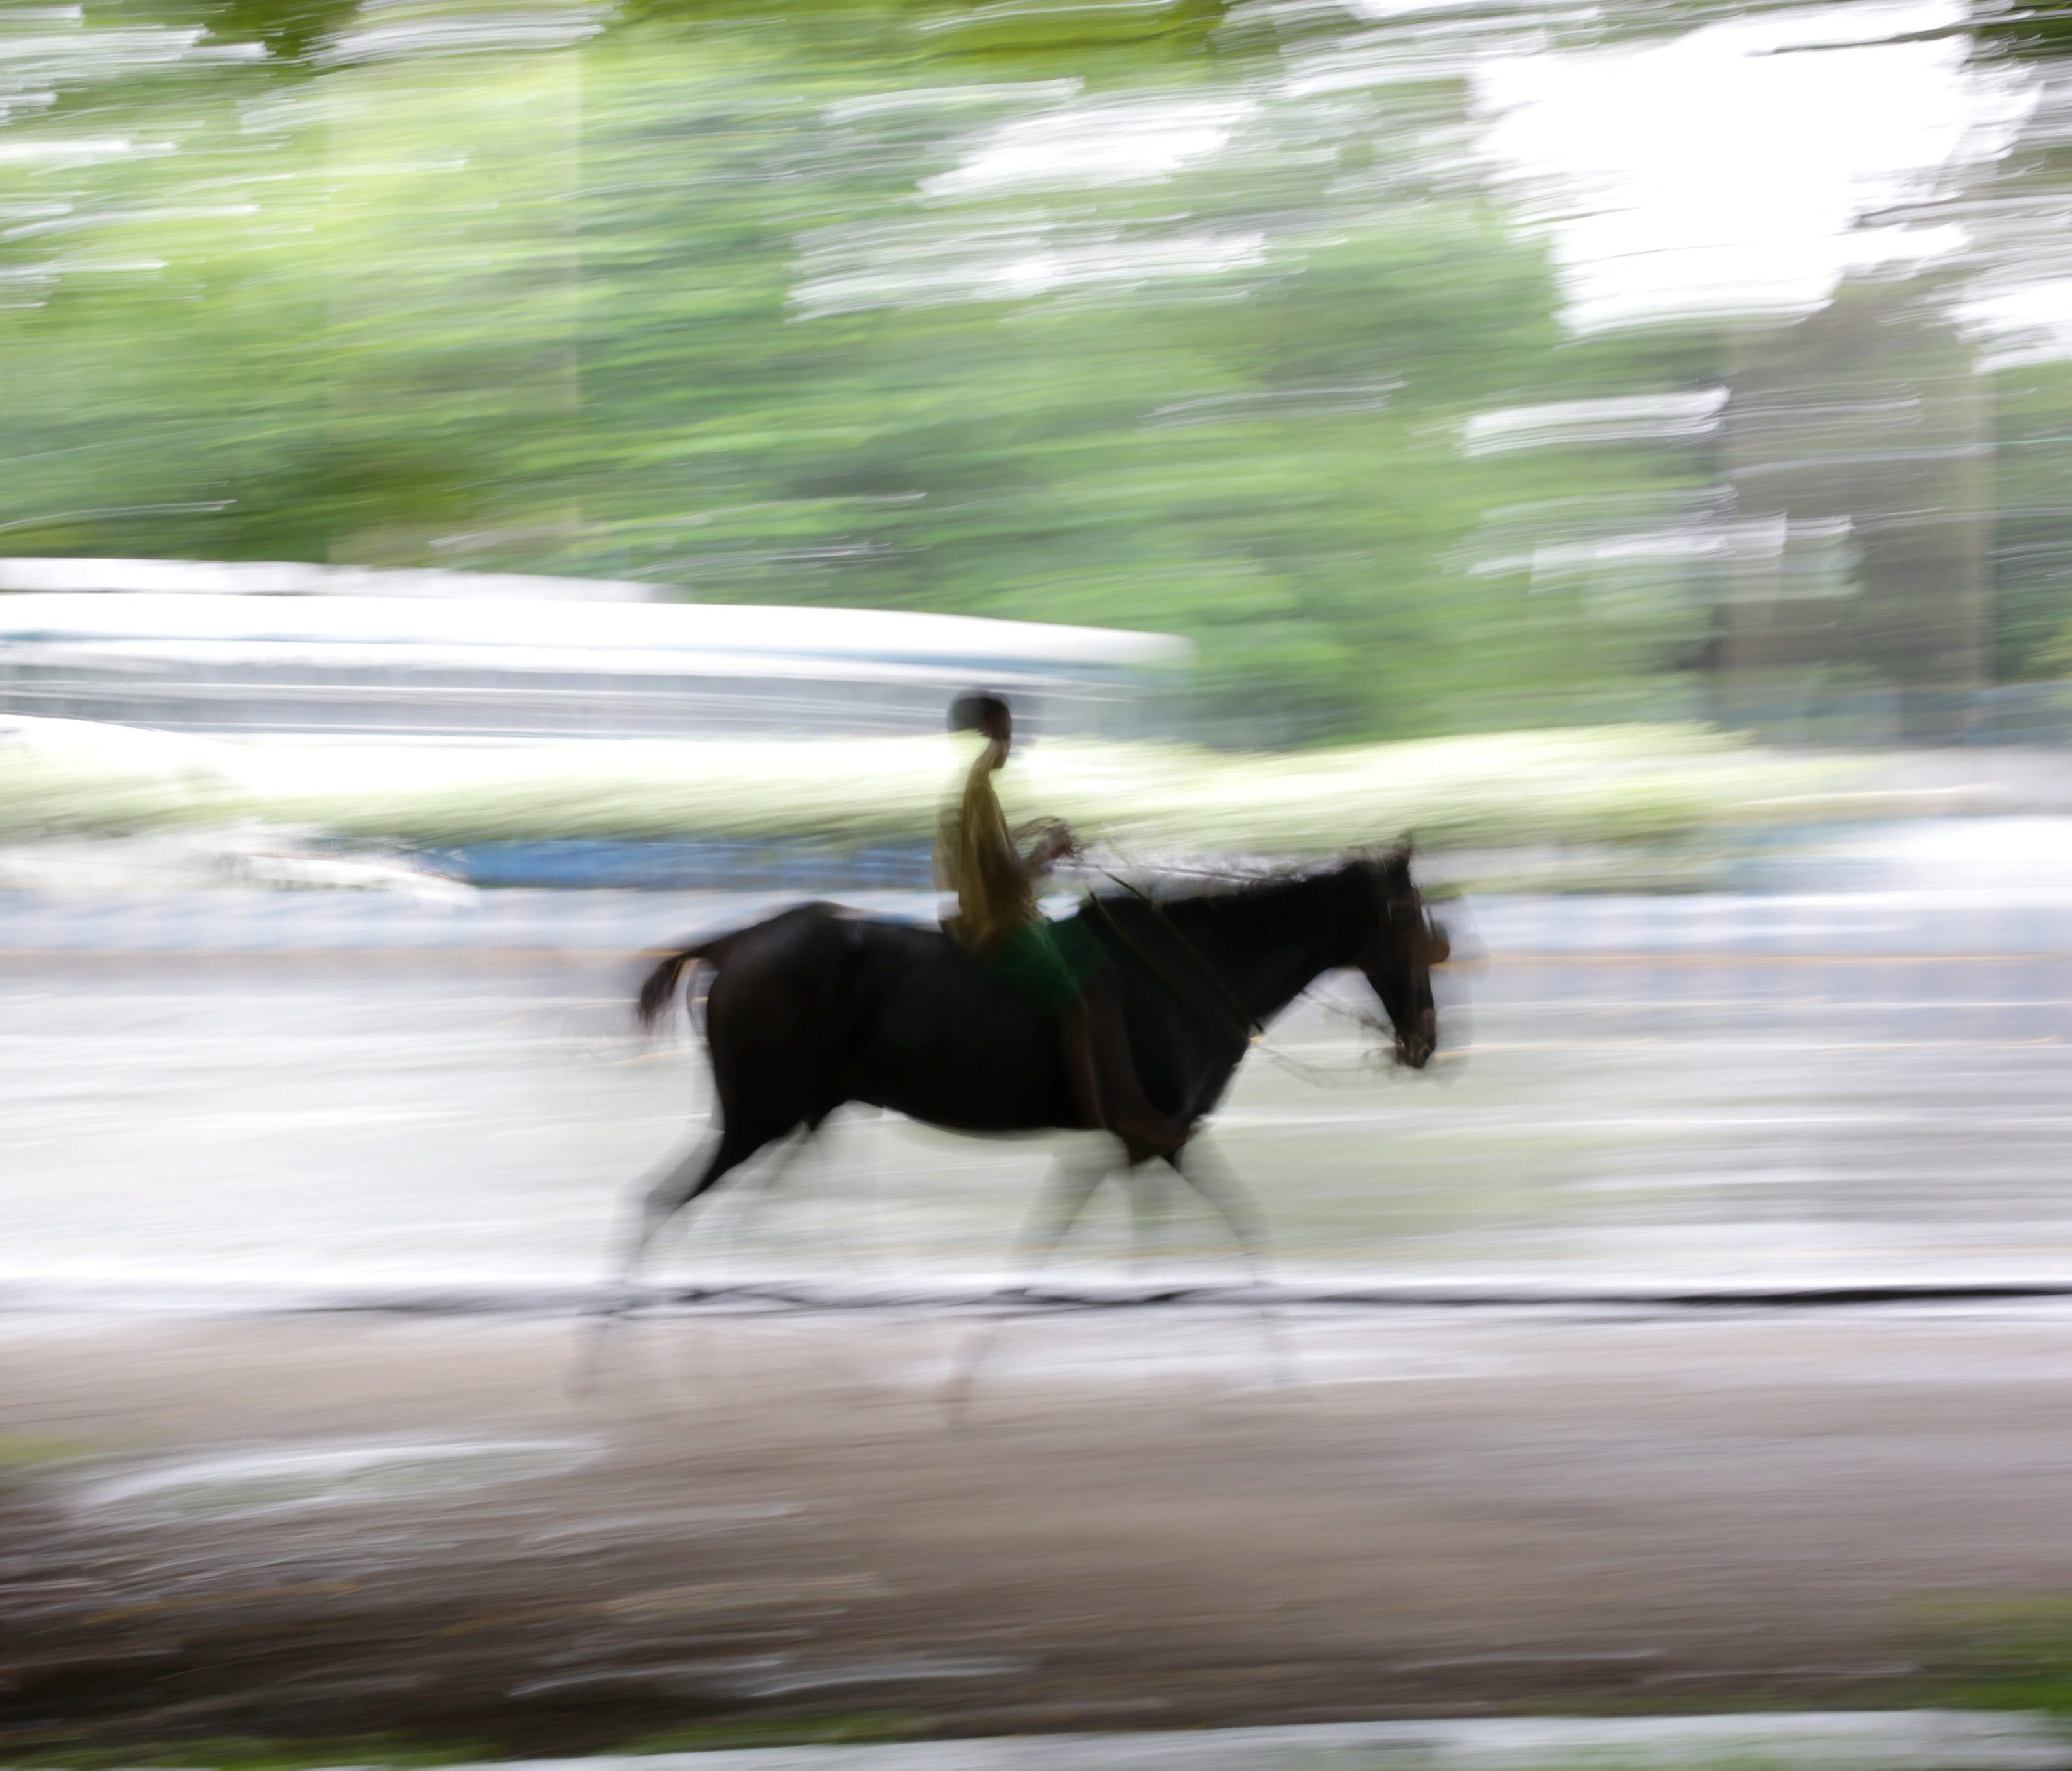 File picture taken with a slow shutter speed shows a boy riding a horse.